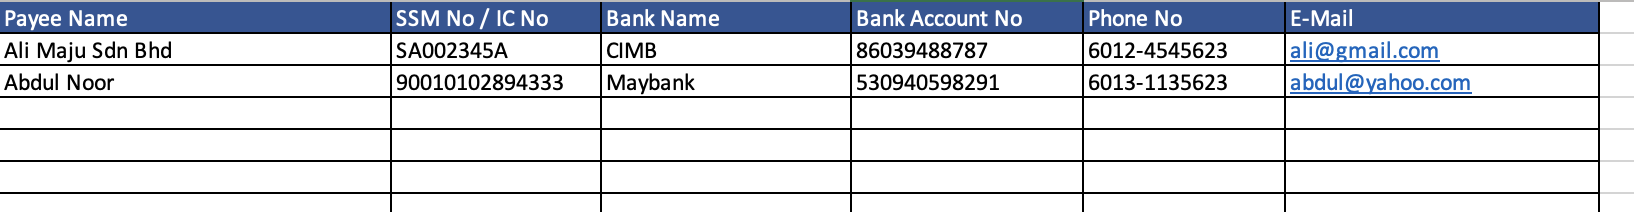 Payment Voucher Excel - Payee